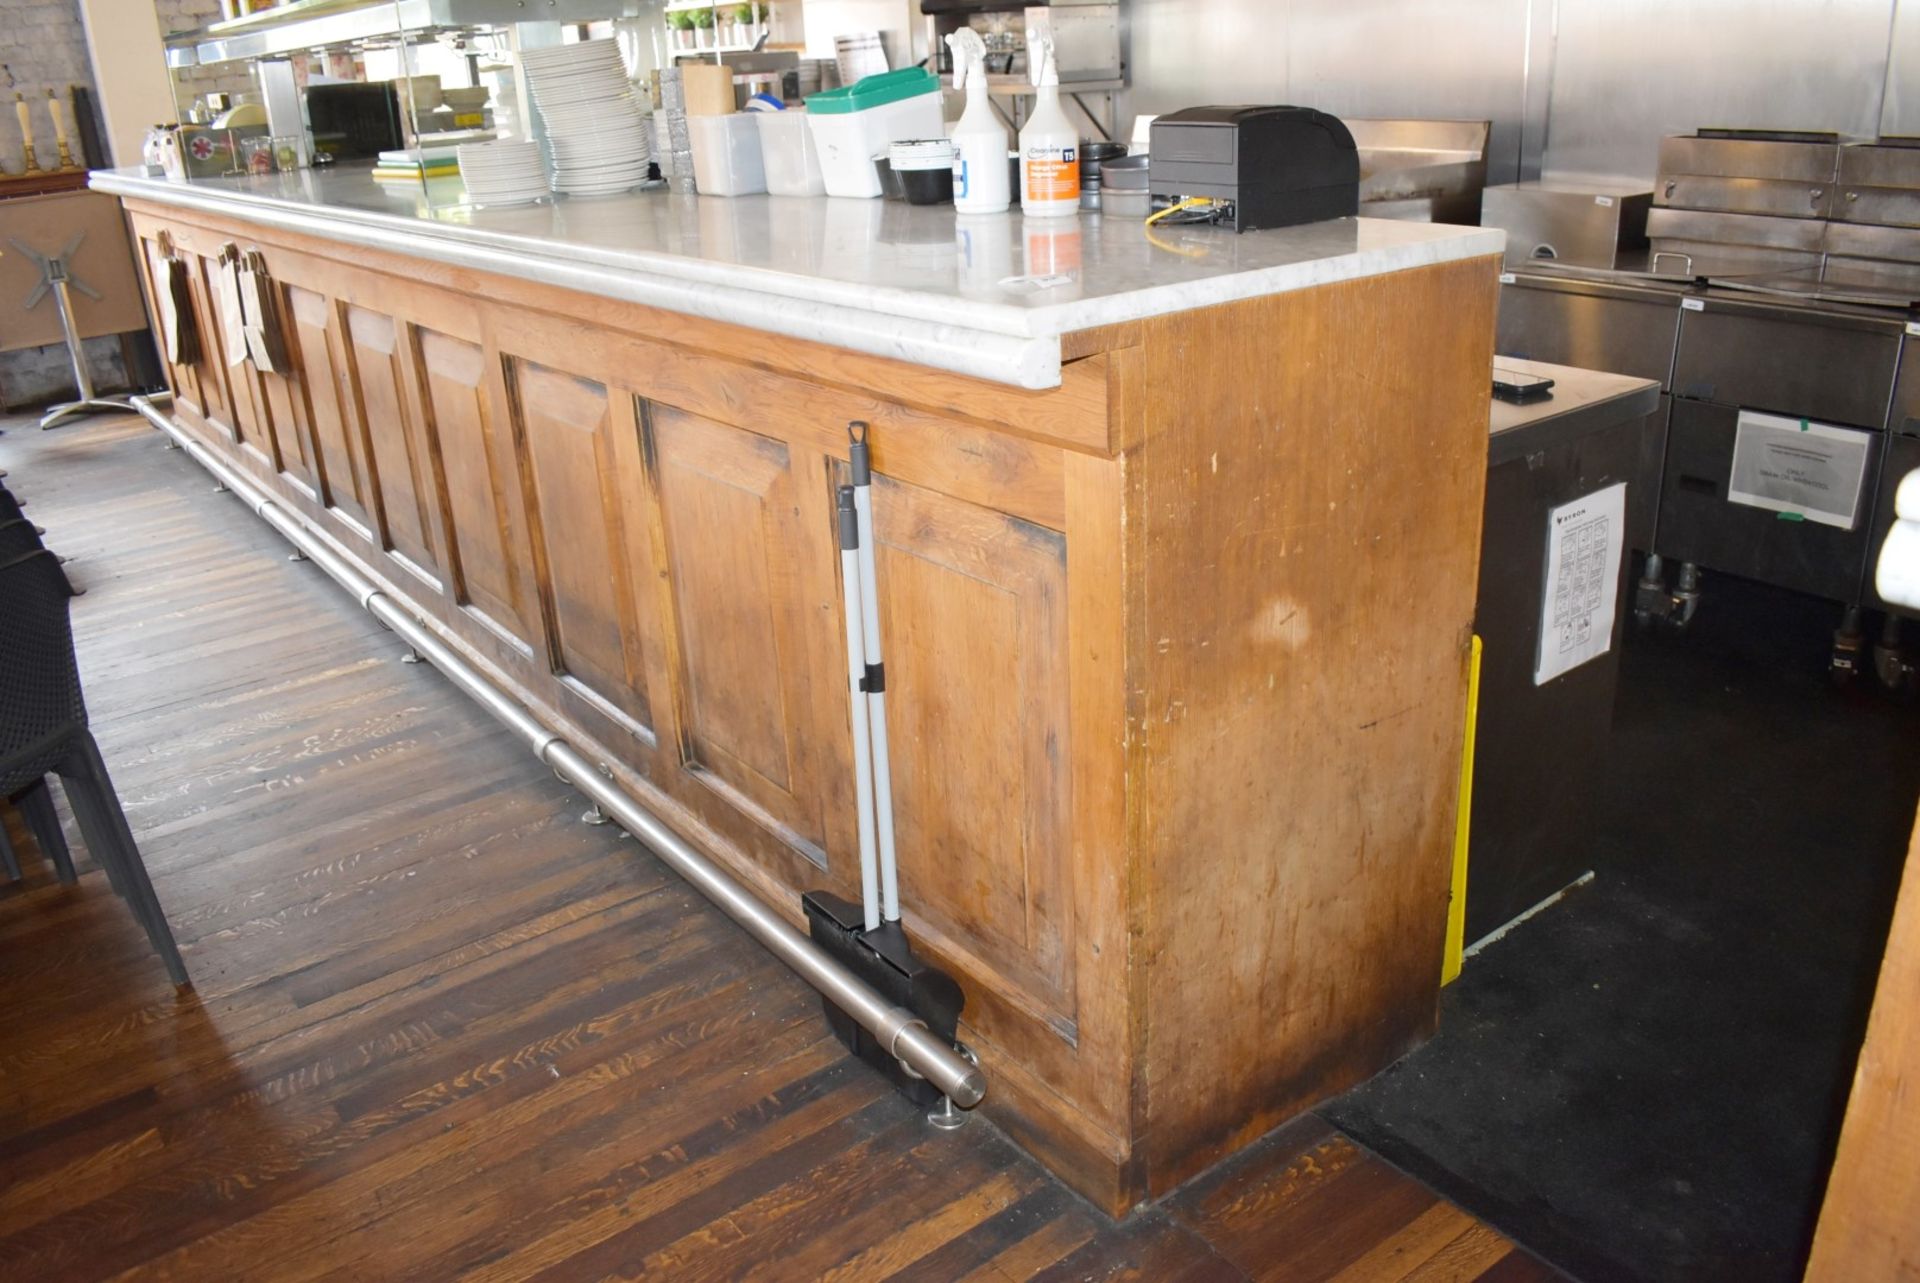 1 x Large 30ft Wood Panel Bar With White Marble Top, Heated Glass Gantry and Chrome Foot Rail - Image 14 of 22